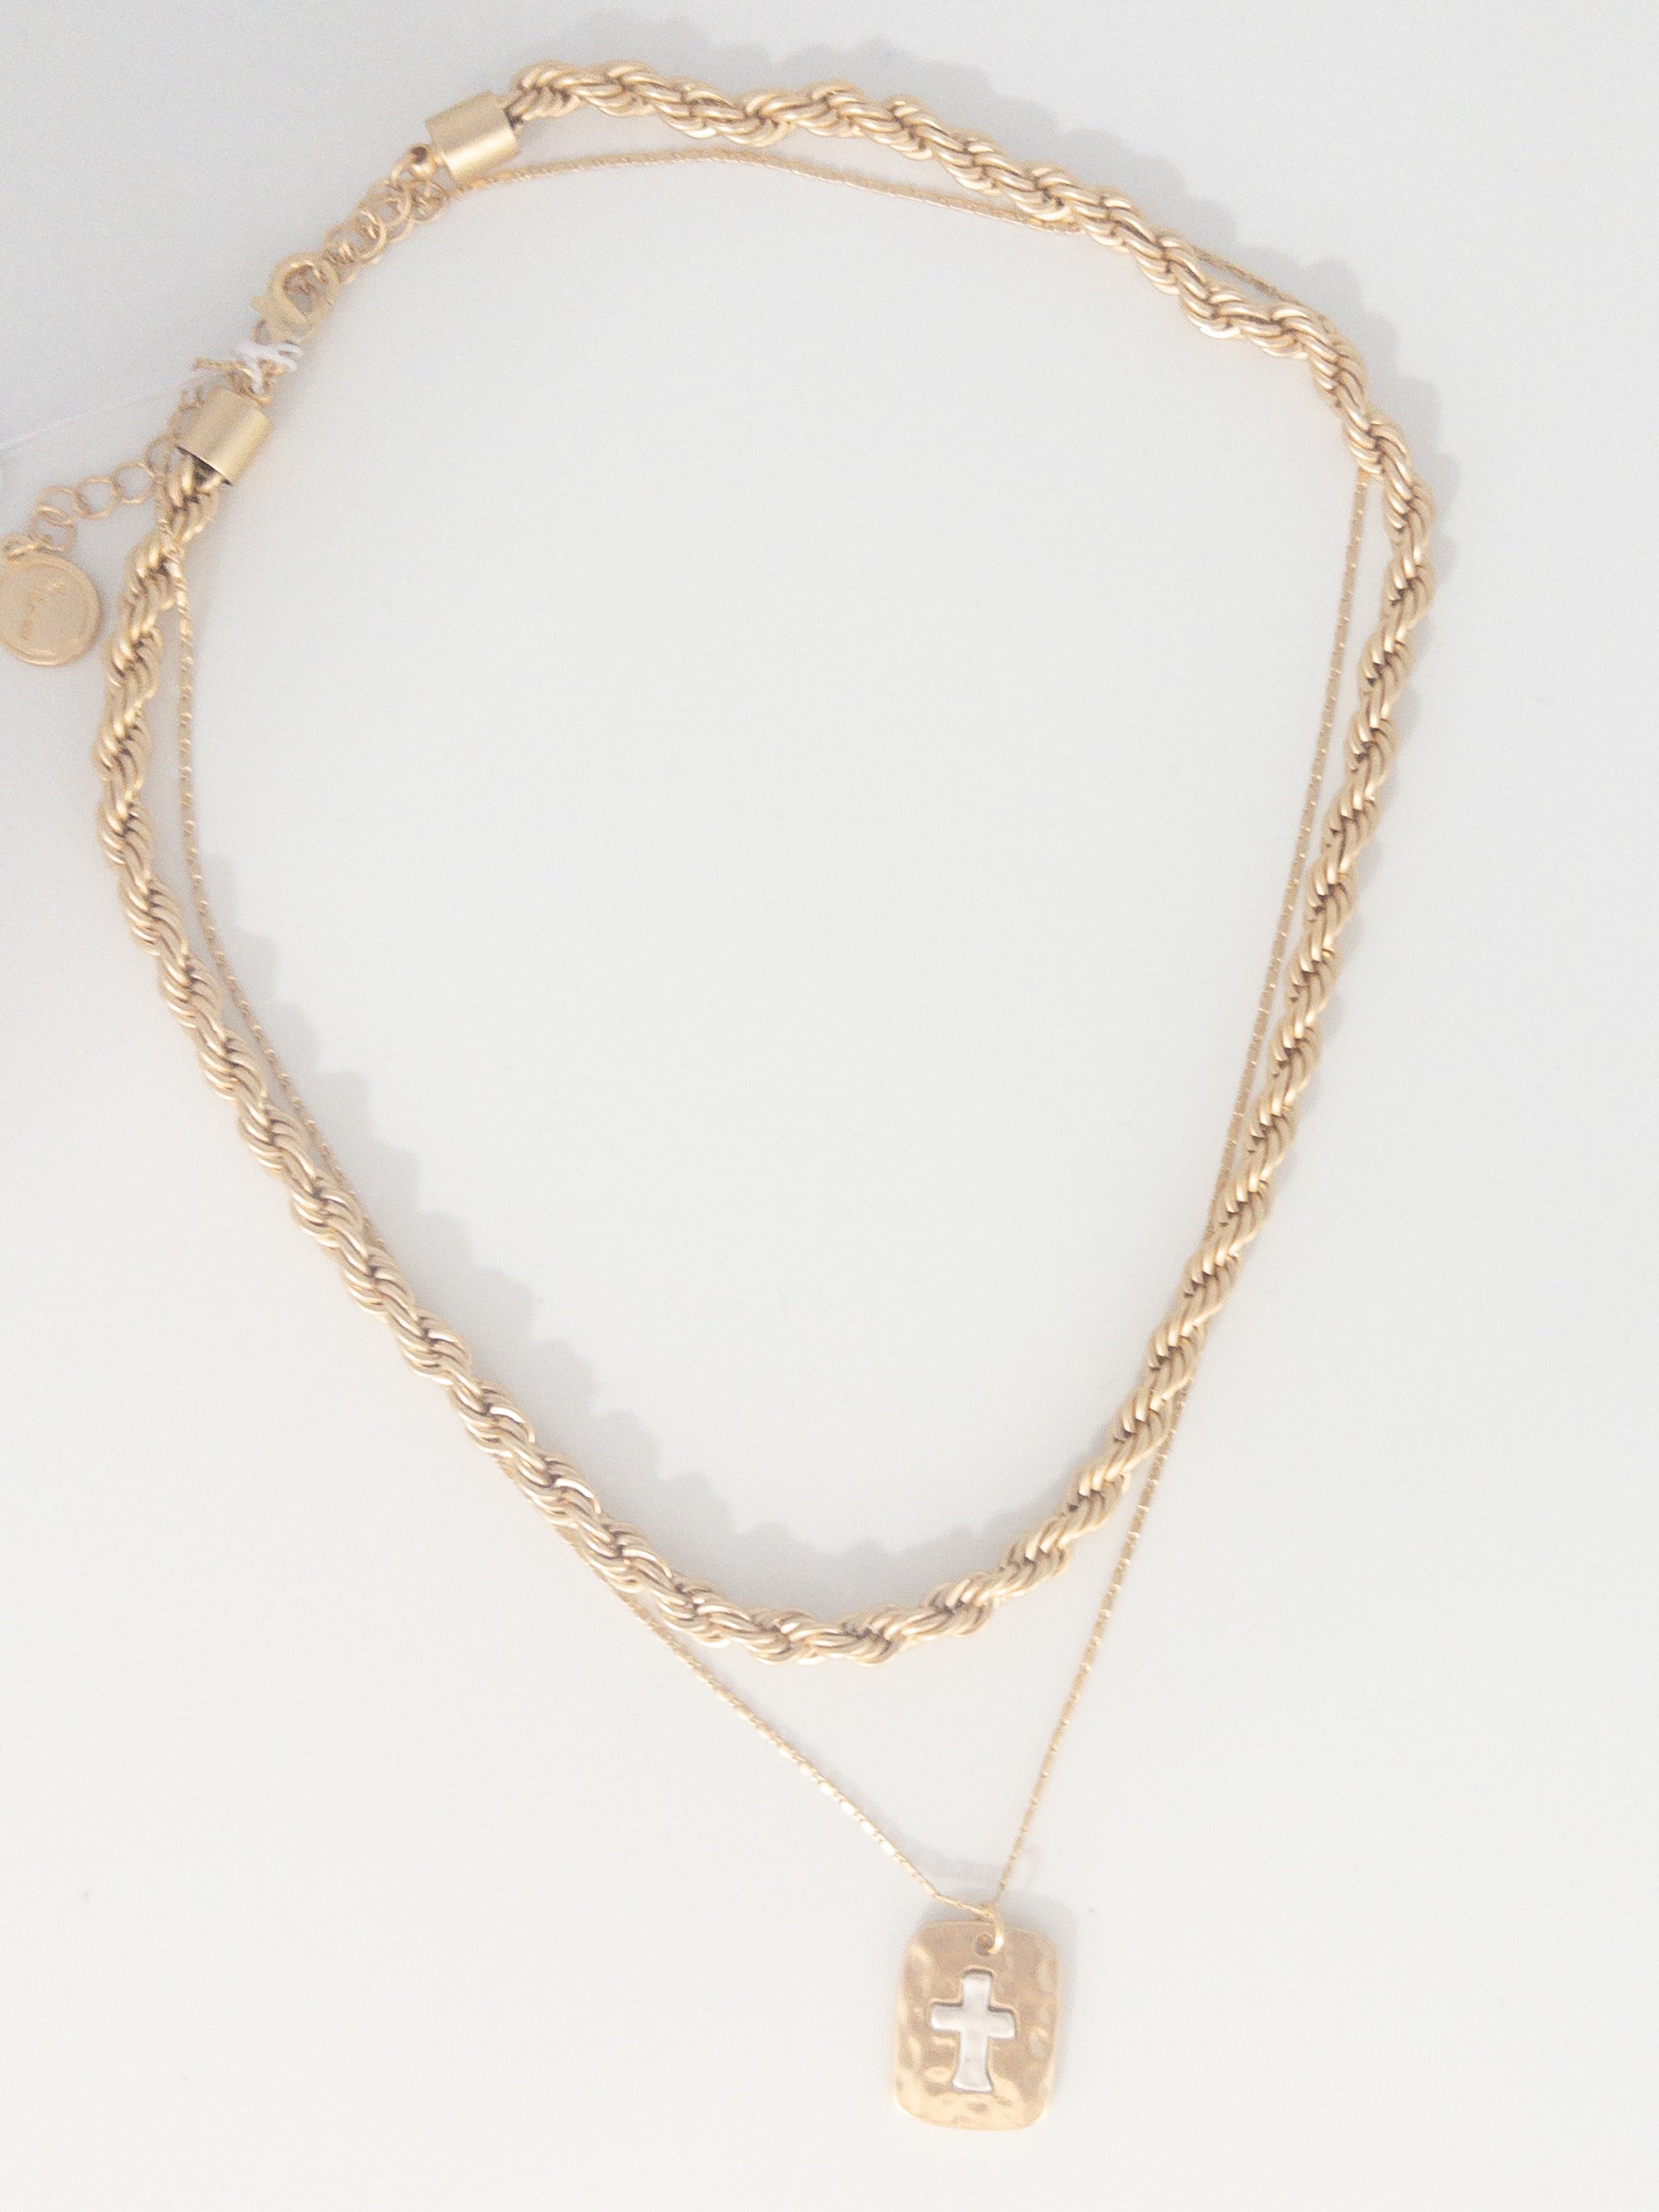 2 STRAND, GOLD SNAKE CHAIN, GOLD SATELLITE CHAIN WITH SILVER CROSS NECKLACE JANE MARIE